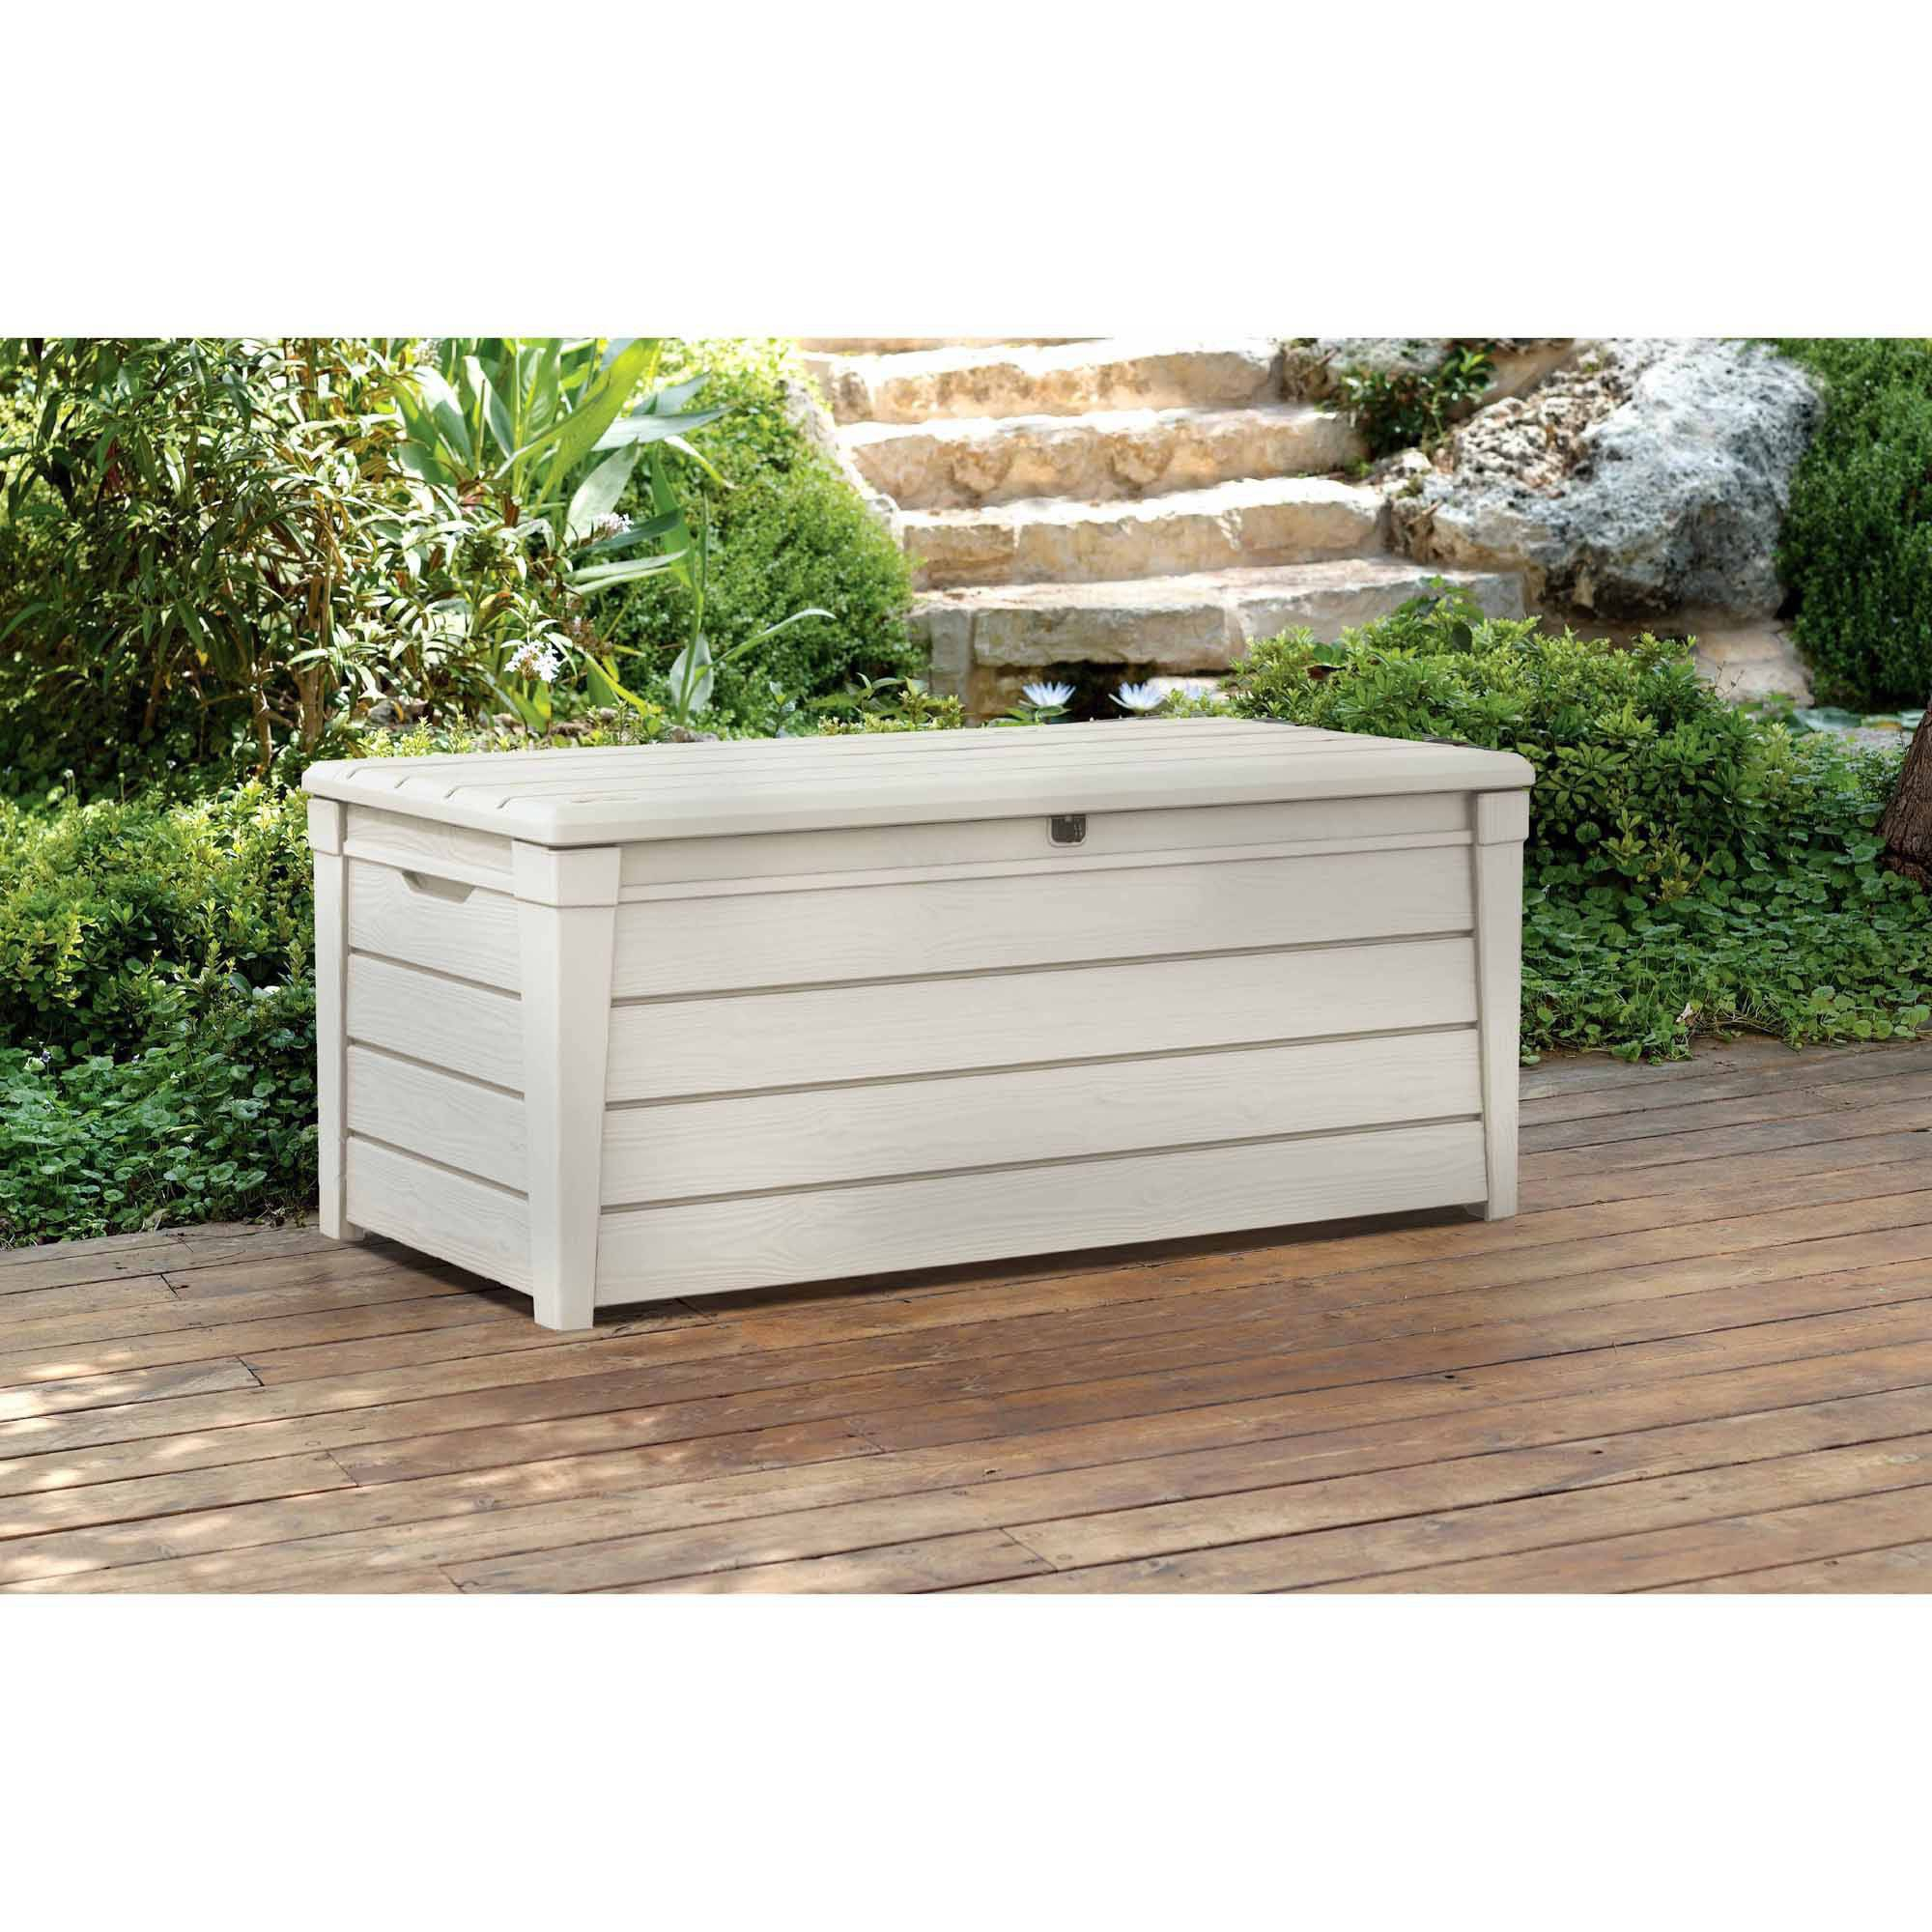 Keter White Deck Box Decks Ideas with regard to proportions 2000 X 2000